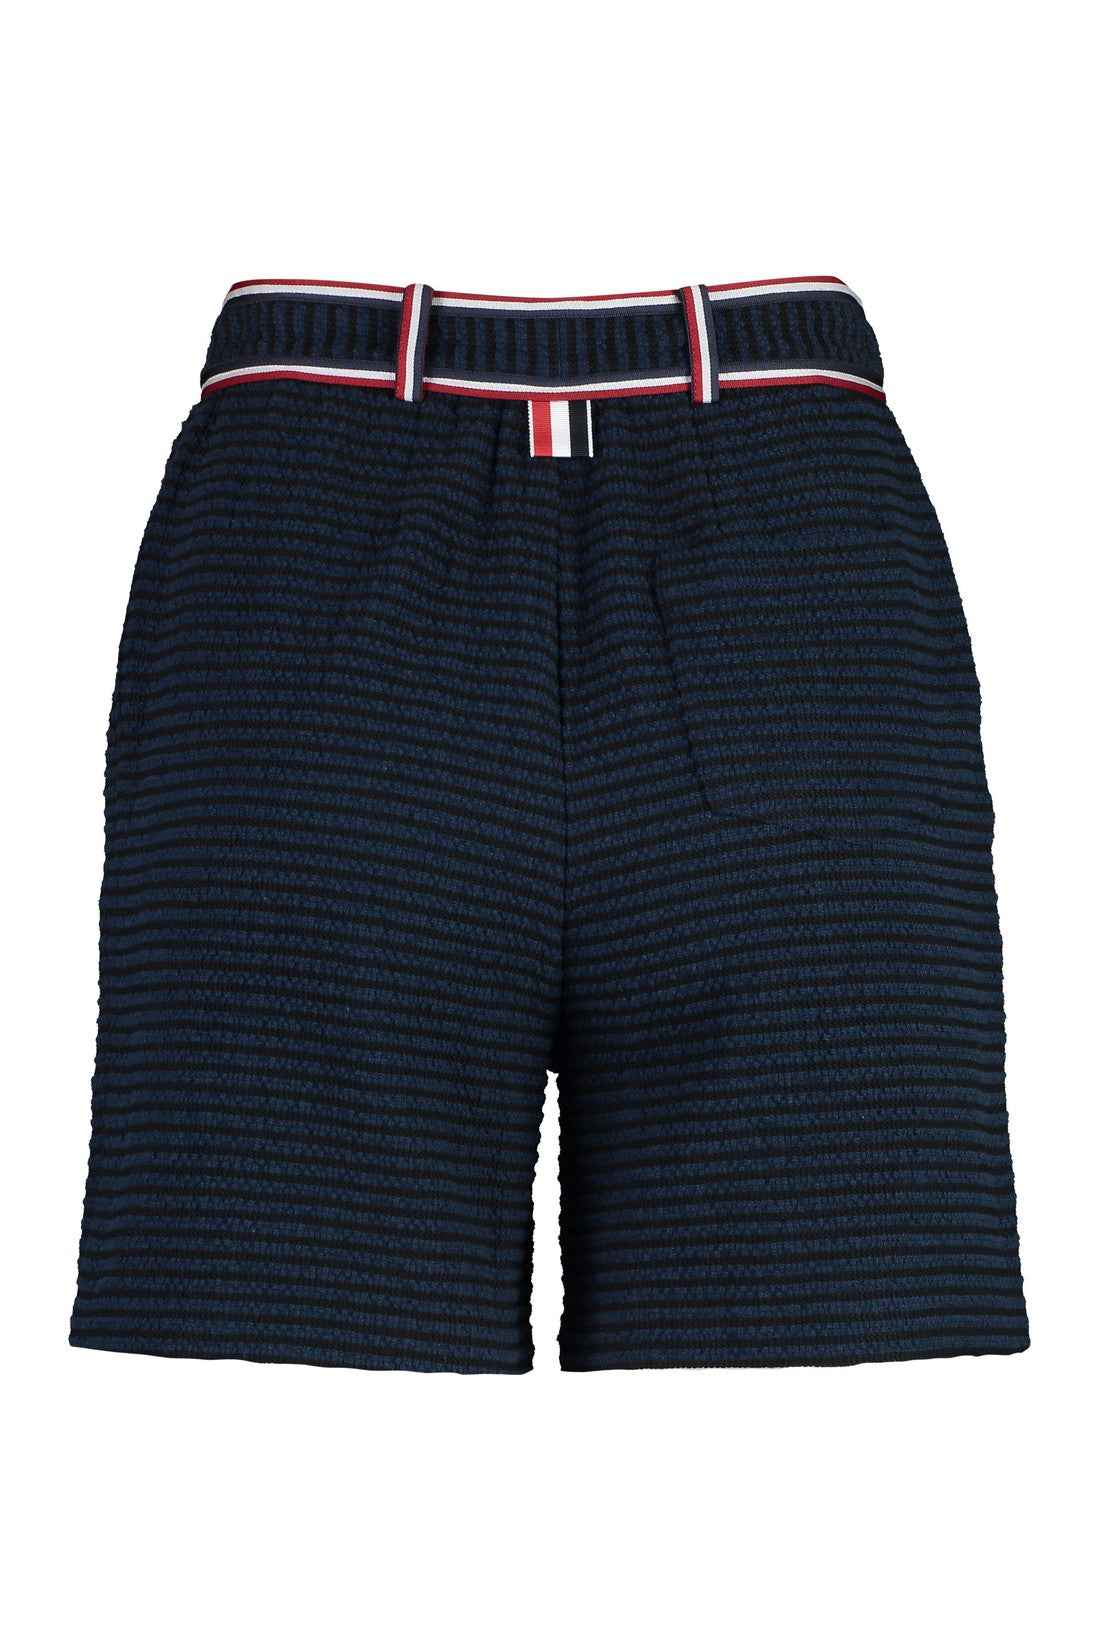 Thom Browne-OUTLET-SALE-Knitted shorts-ARCHIVIST